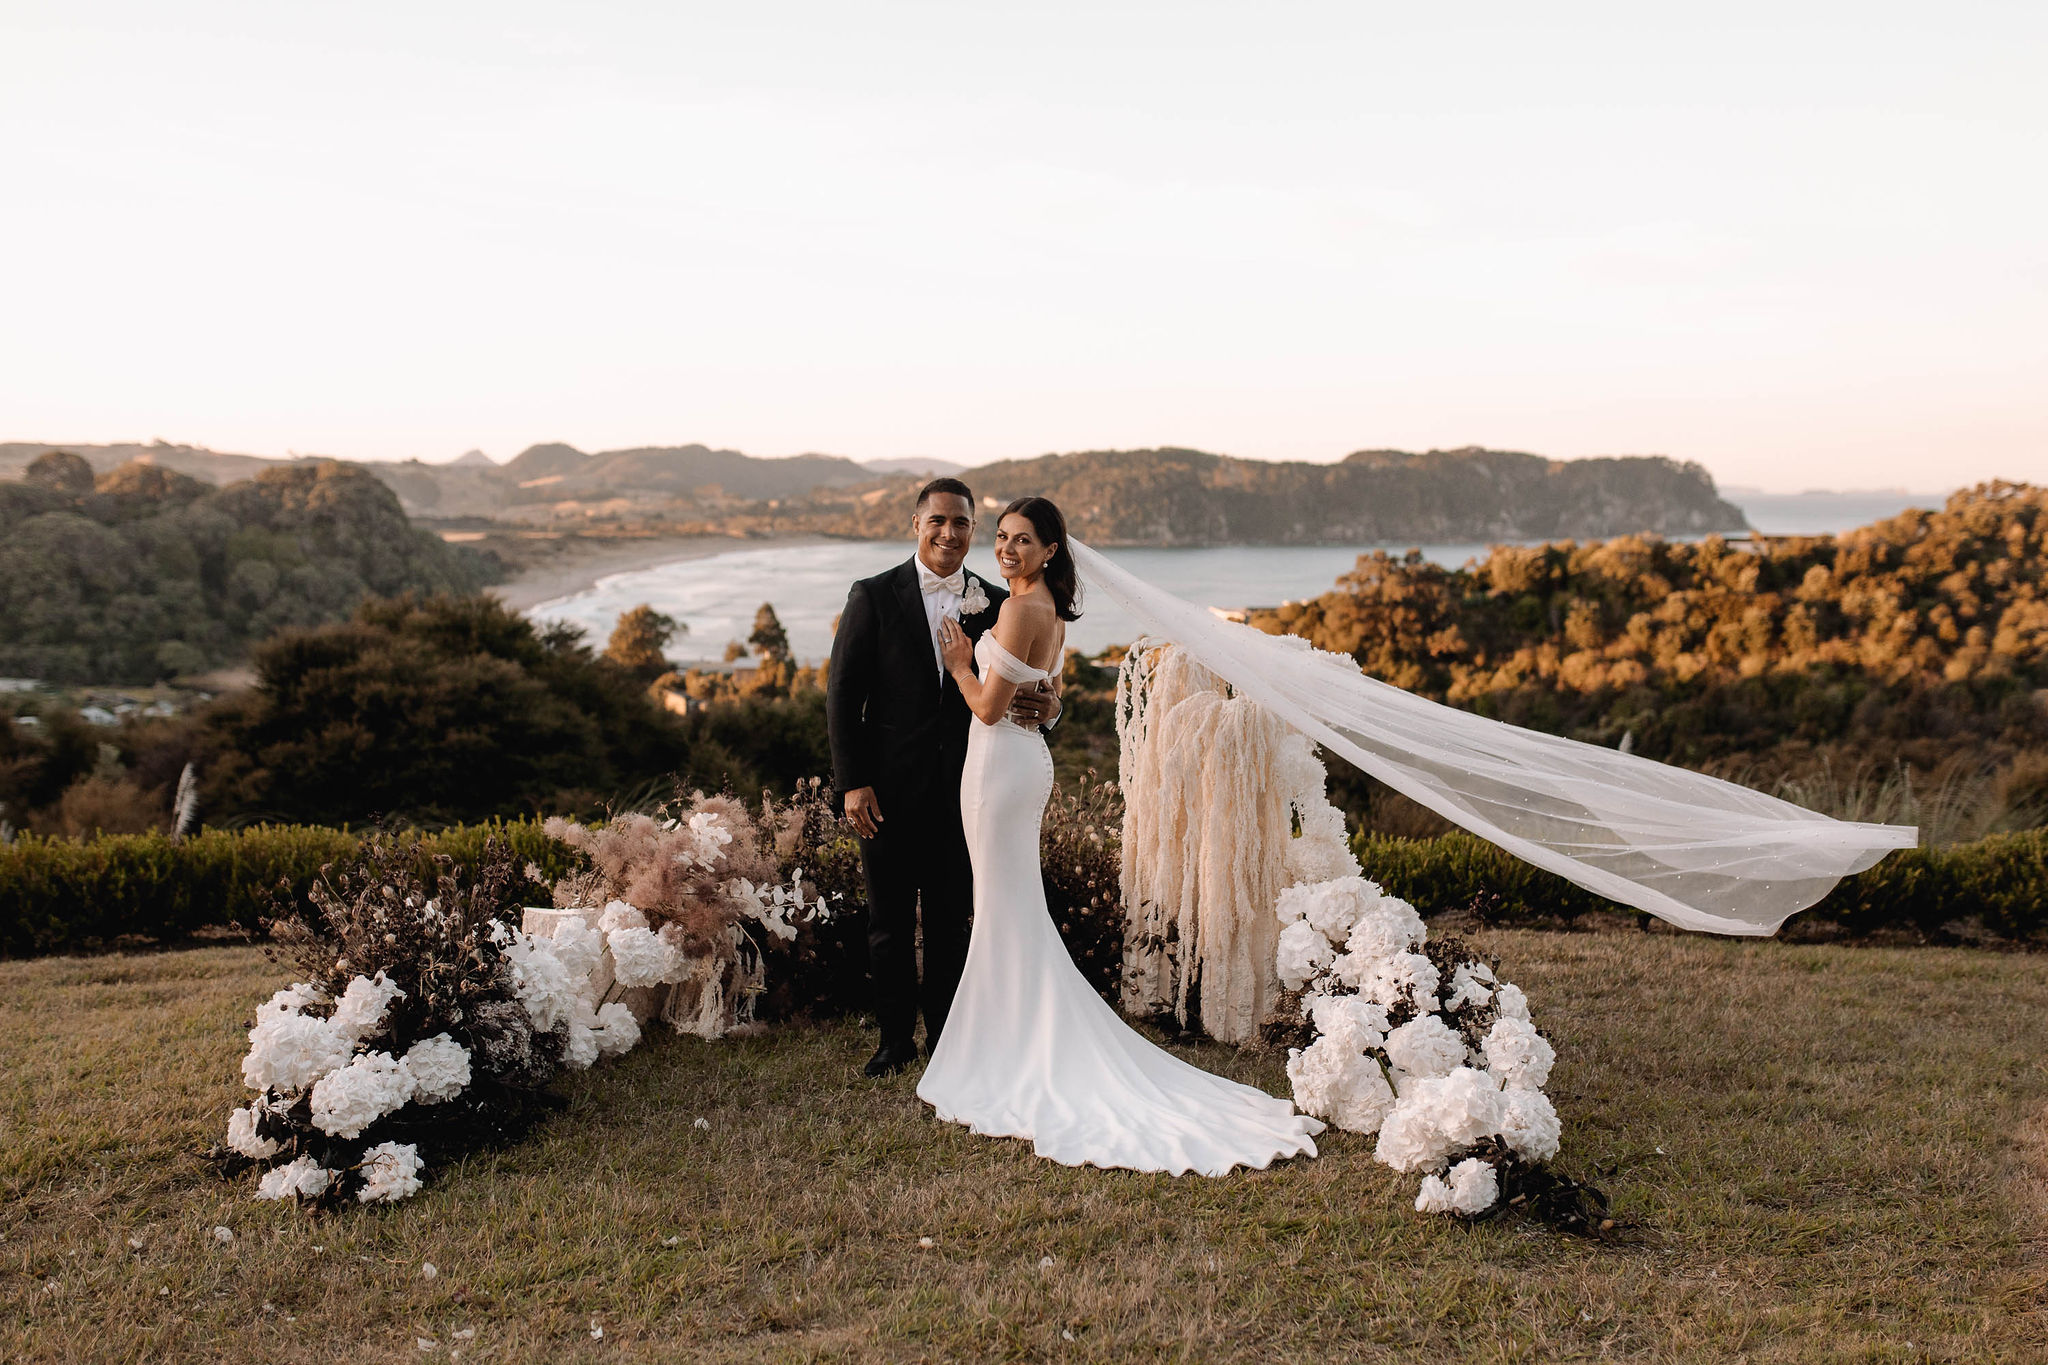 Wedding ceremony overlooking mountains and lake in New Zealand.